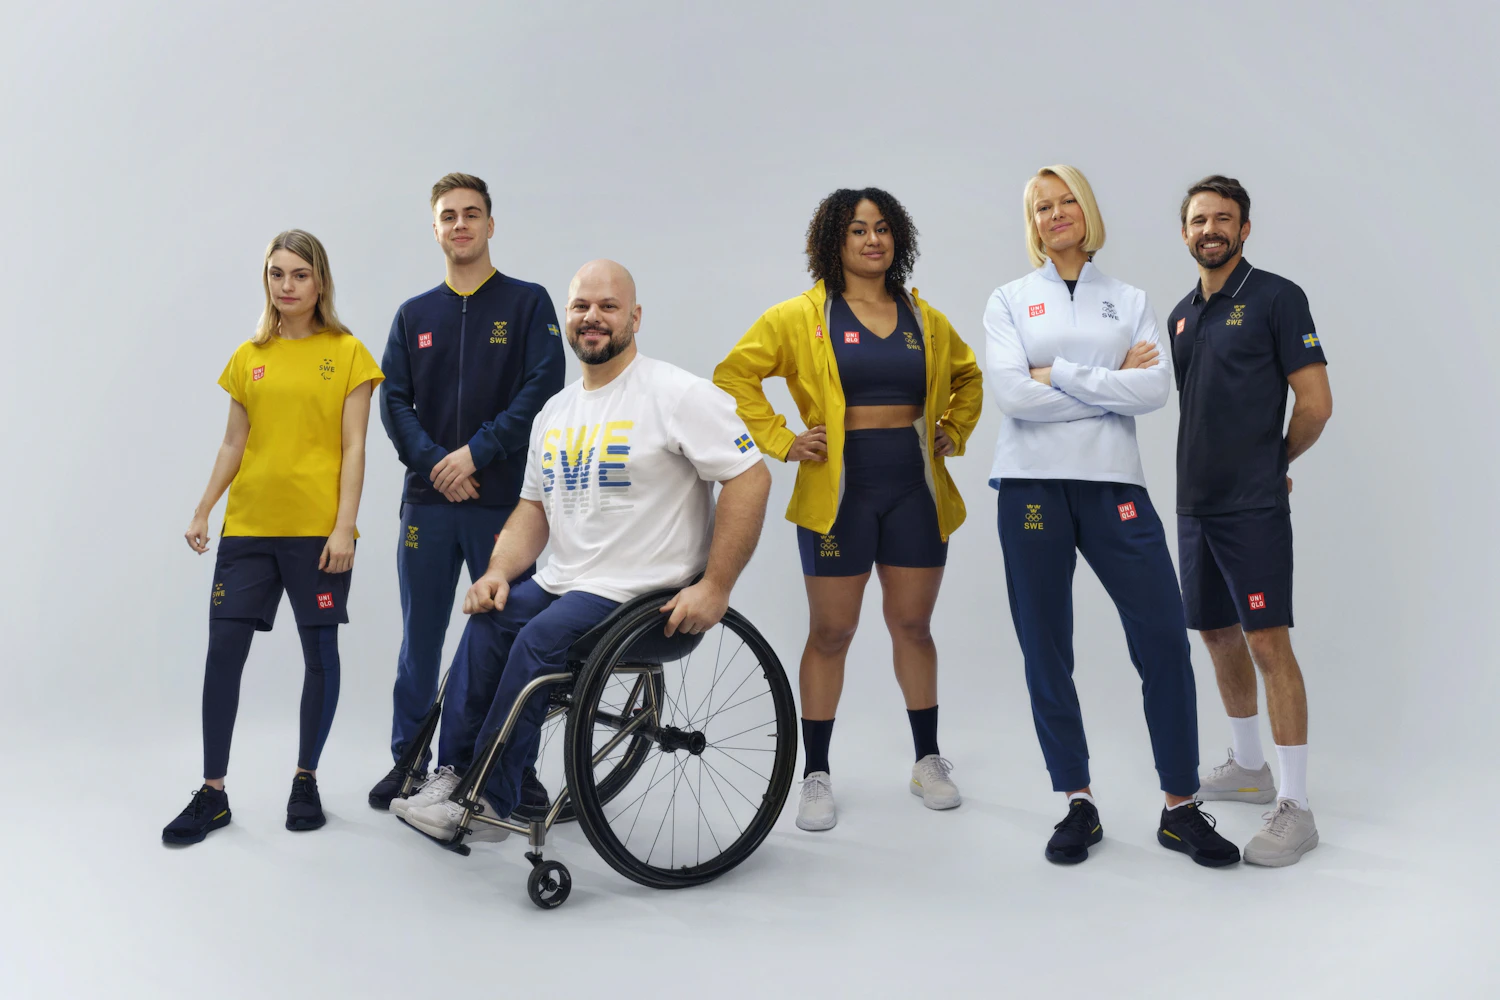 Wearing the official uniforms for the Paris Olympics and Paralympics, "UNIQLO Team Sweden" provided by the Swedish Olympic and Paralympic Committees.